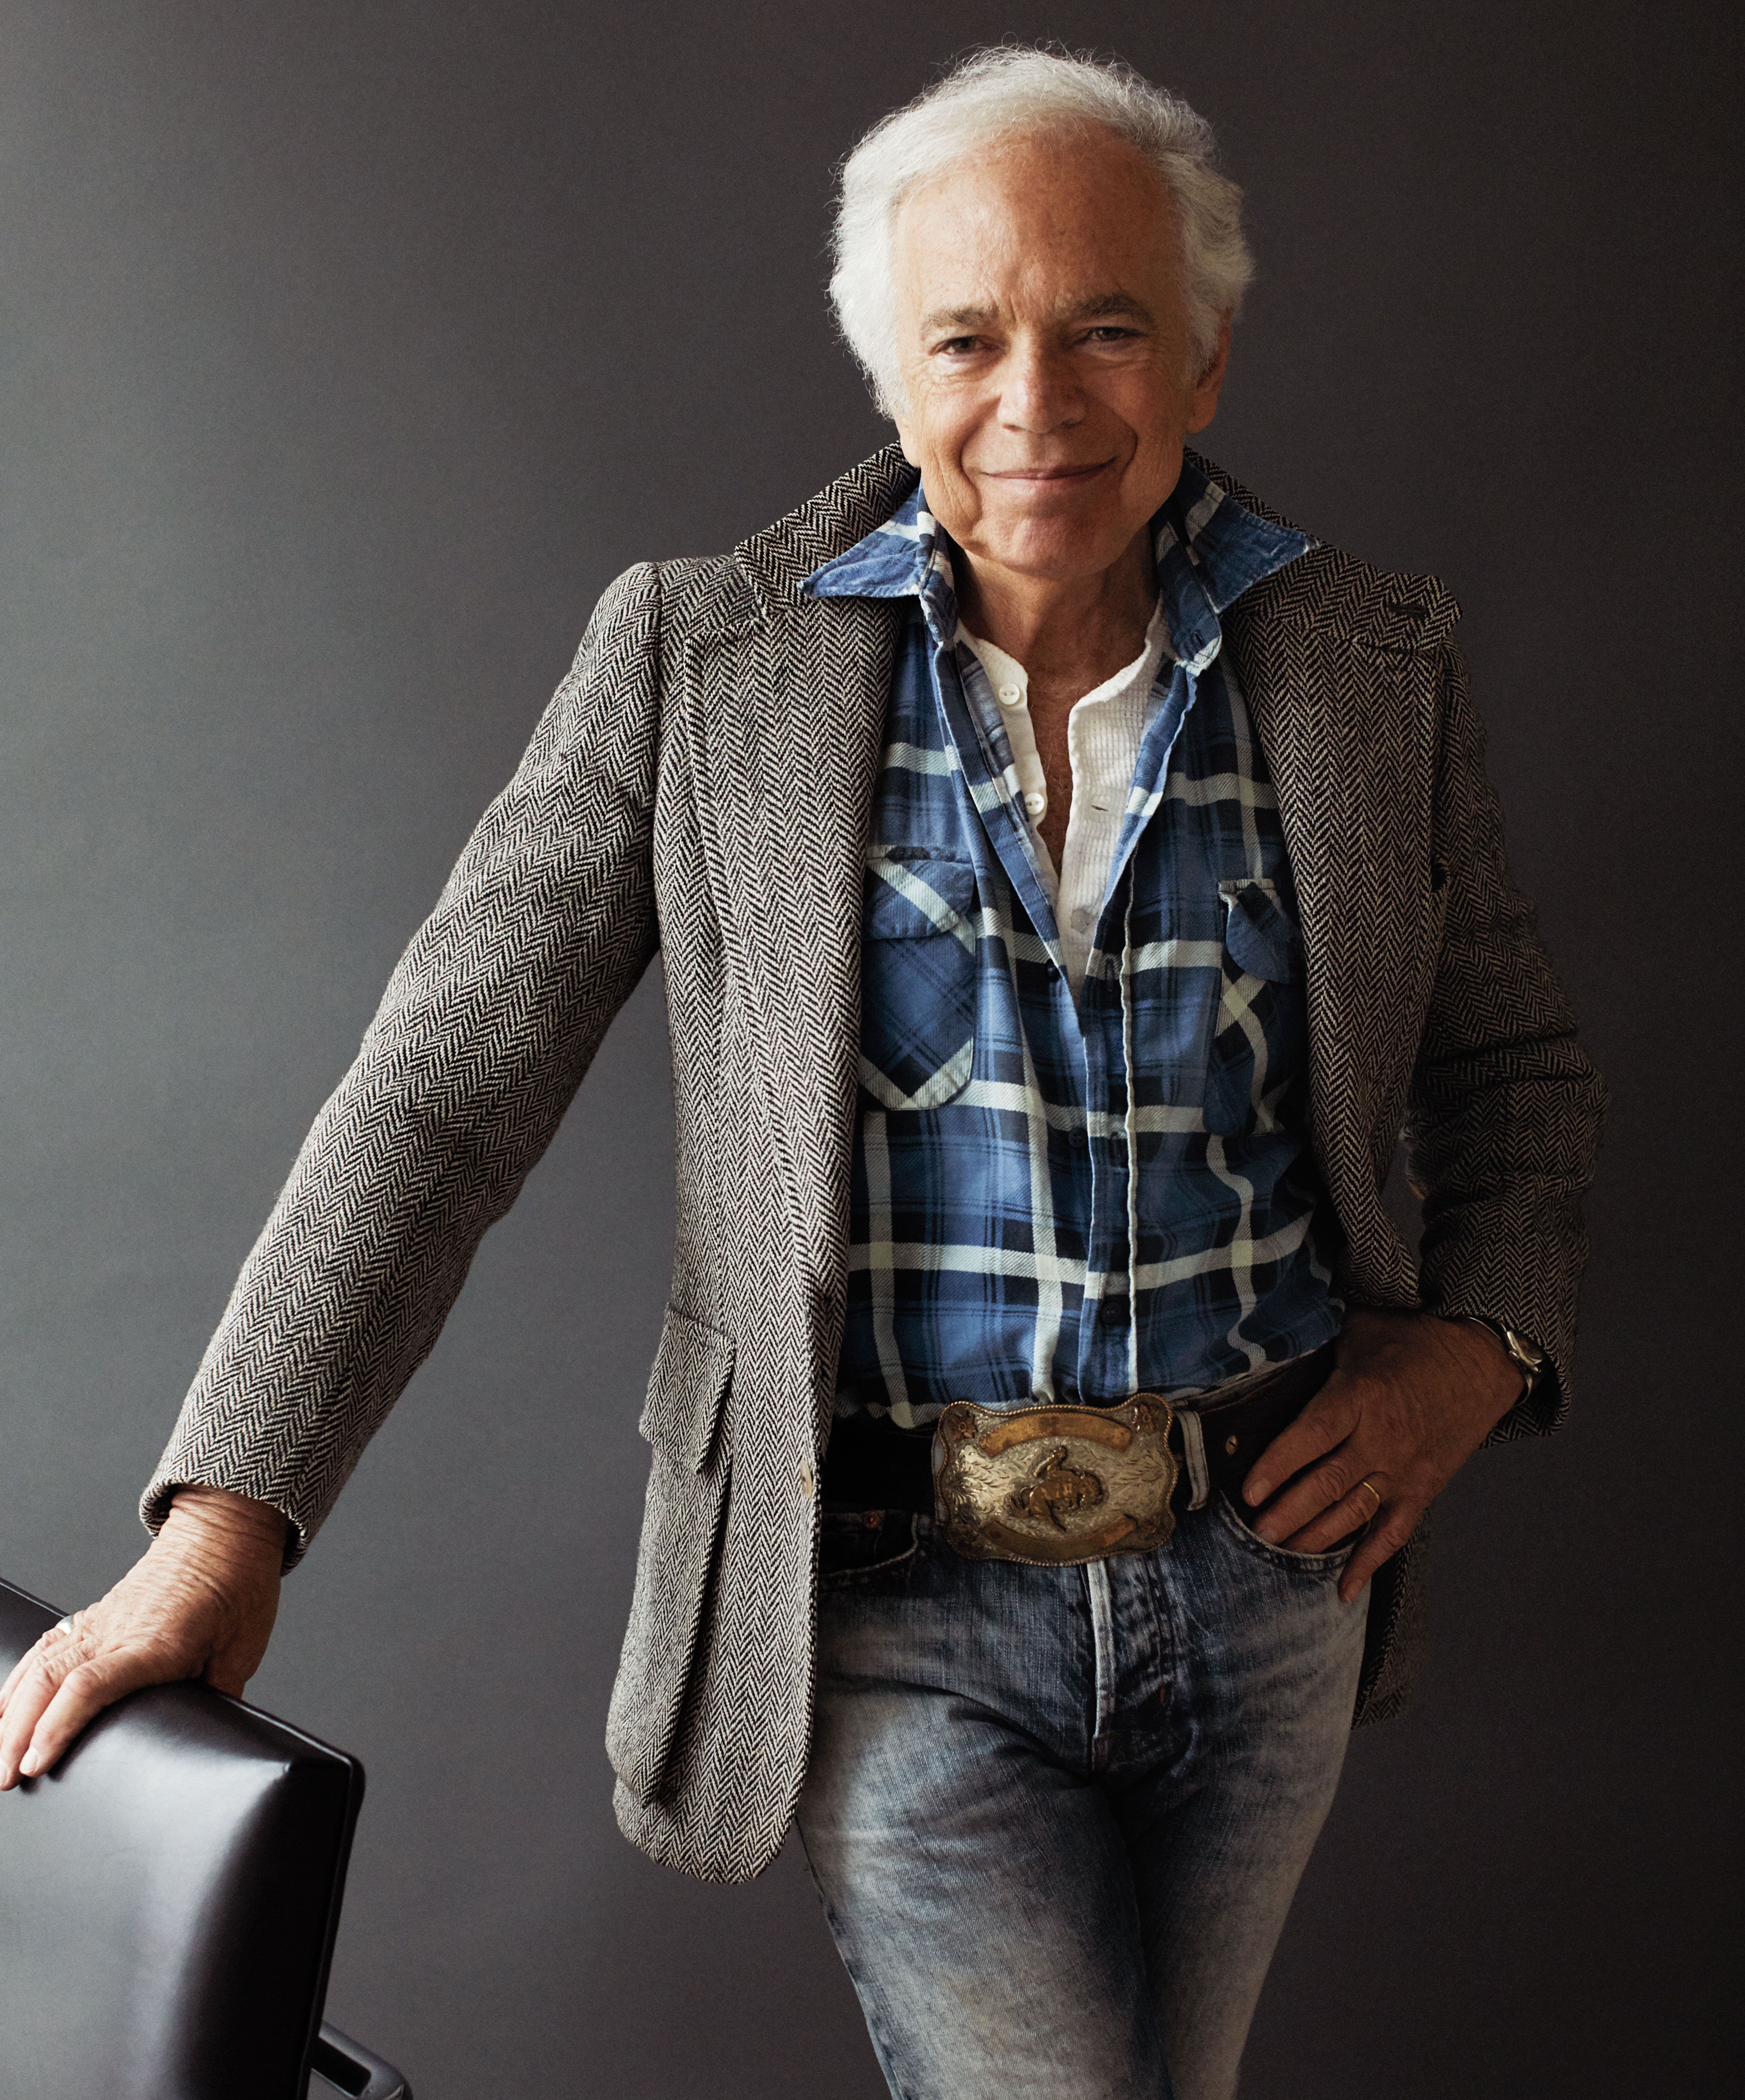 Ralph Lauren Reflects on What It Means to Be an American Designer